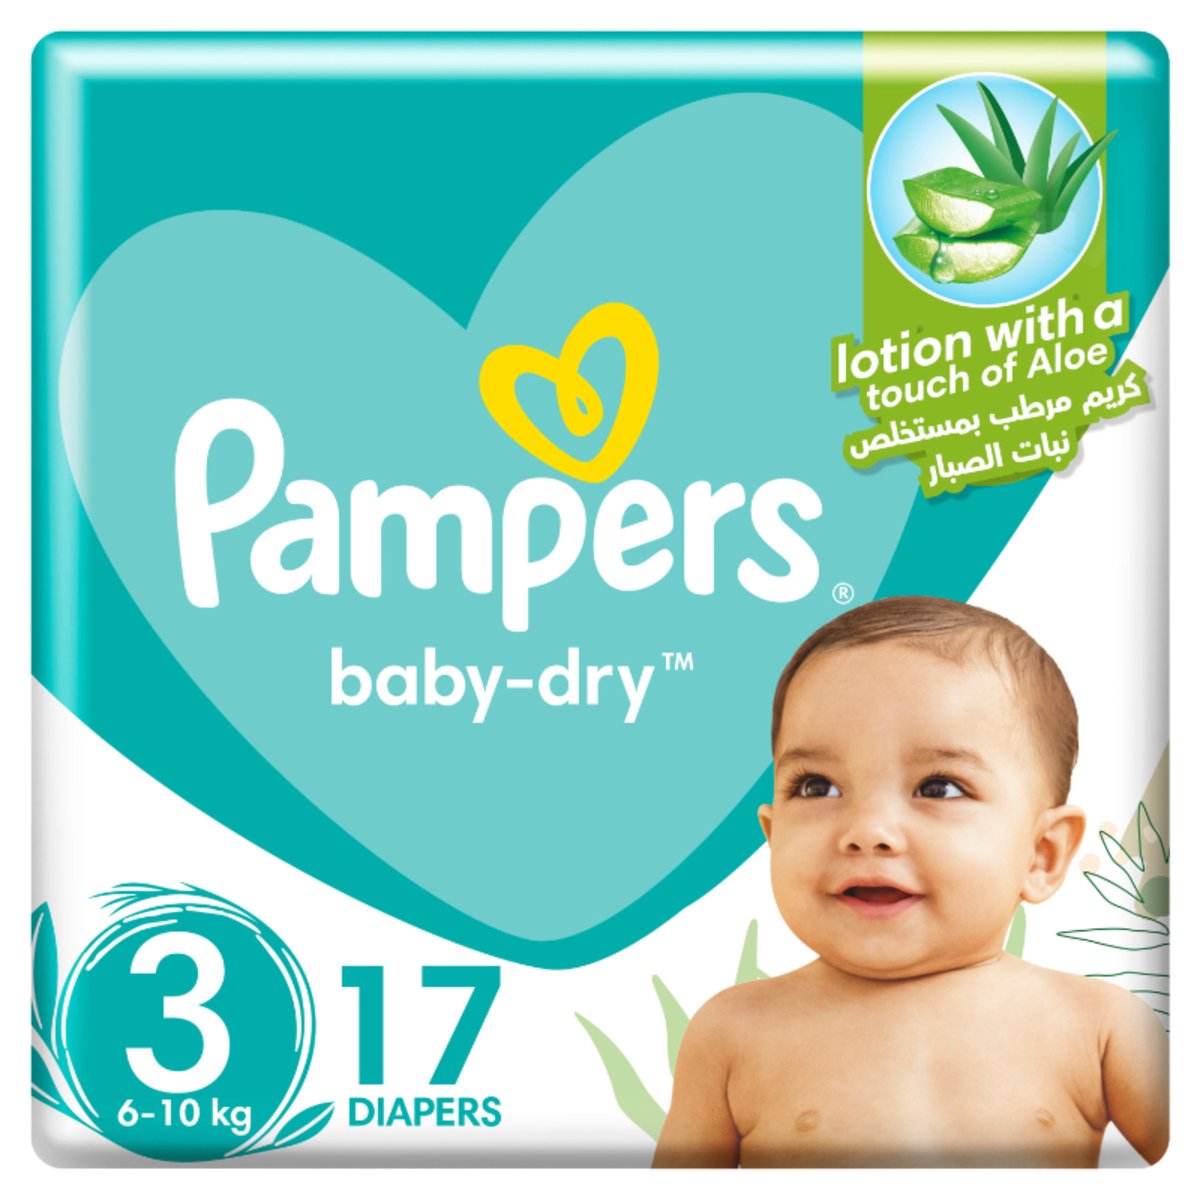 Buy Pampers Baby-Dry Taped Diapers with Aloe Vera Lotion, up to 100% Leakage Protection, Size 3, 6-10kg, 17 pcs Online at Best Price | Baby Nappies | Lulu Kuwait in Kuwait